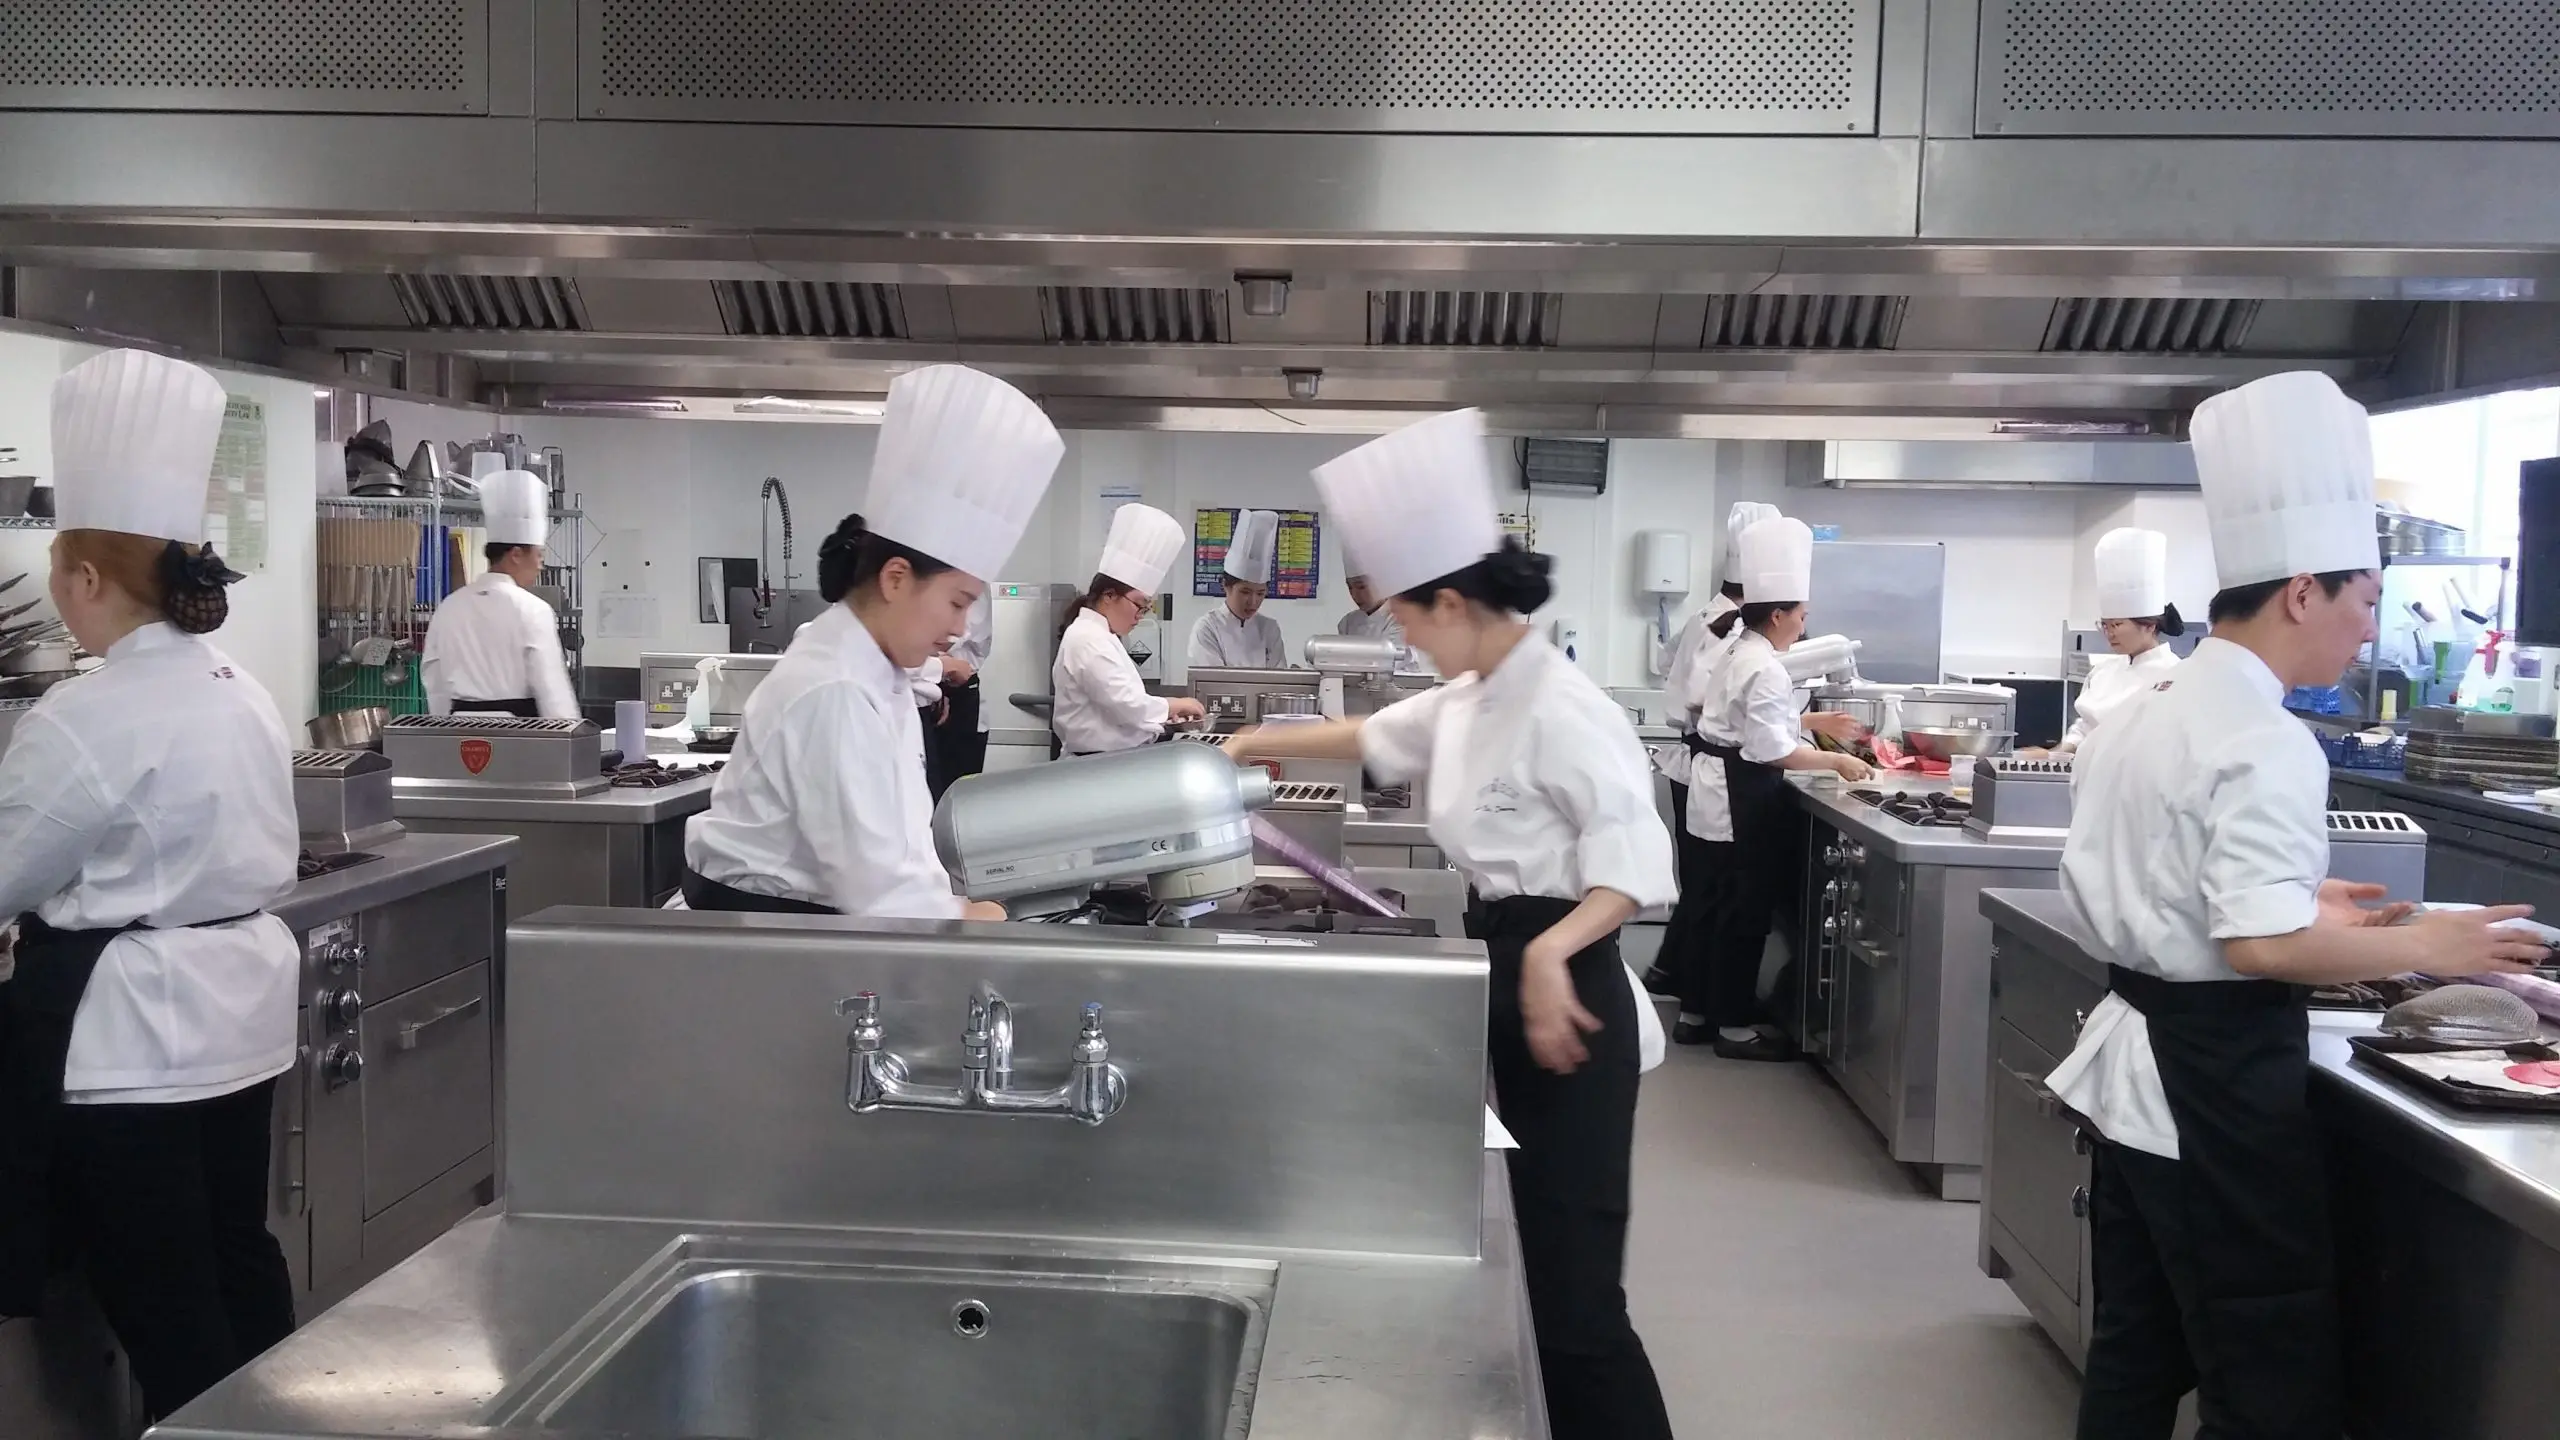 Westminster Kingsway College delivers bespoke hospitality training Programme for students from Hyejeon College, Korea